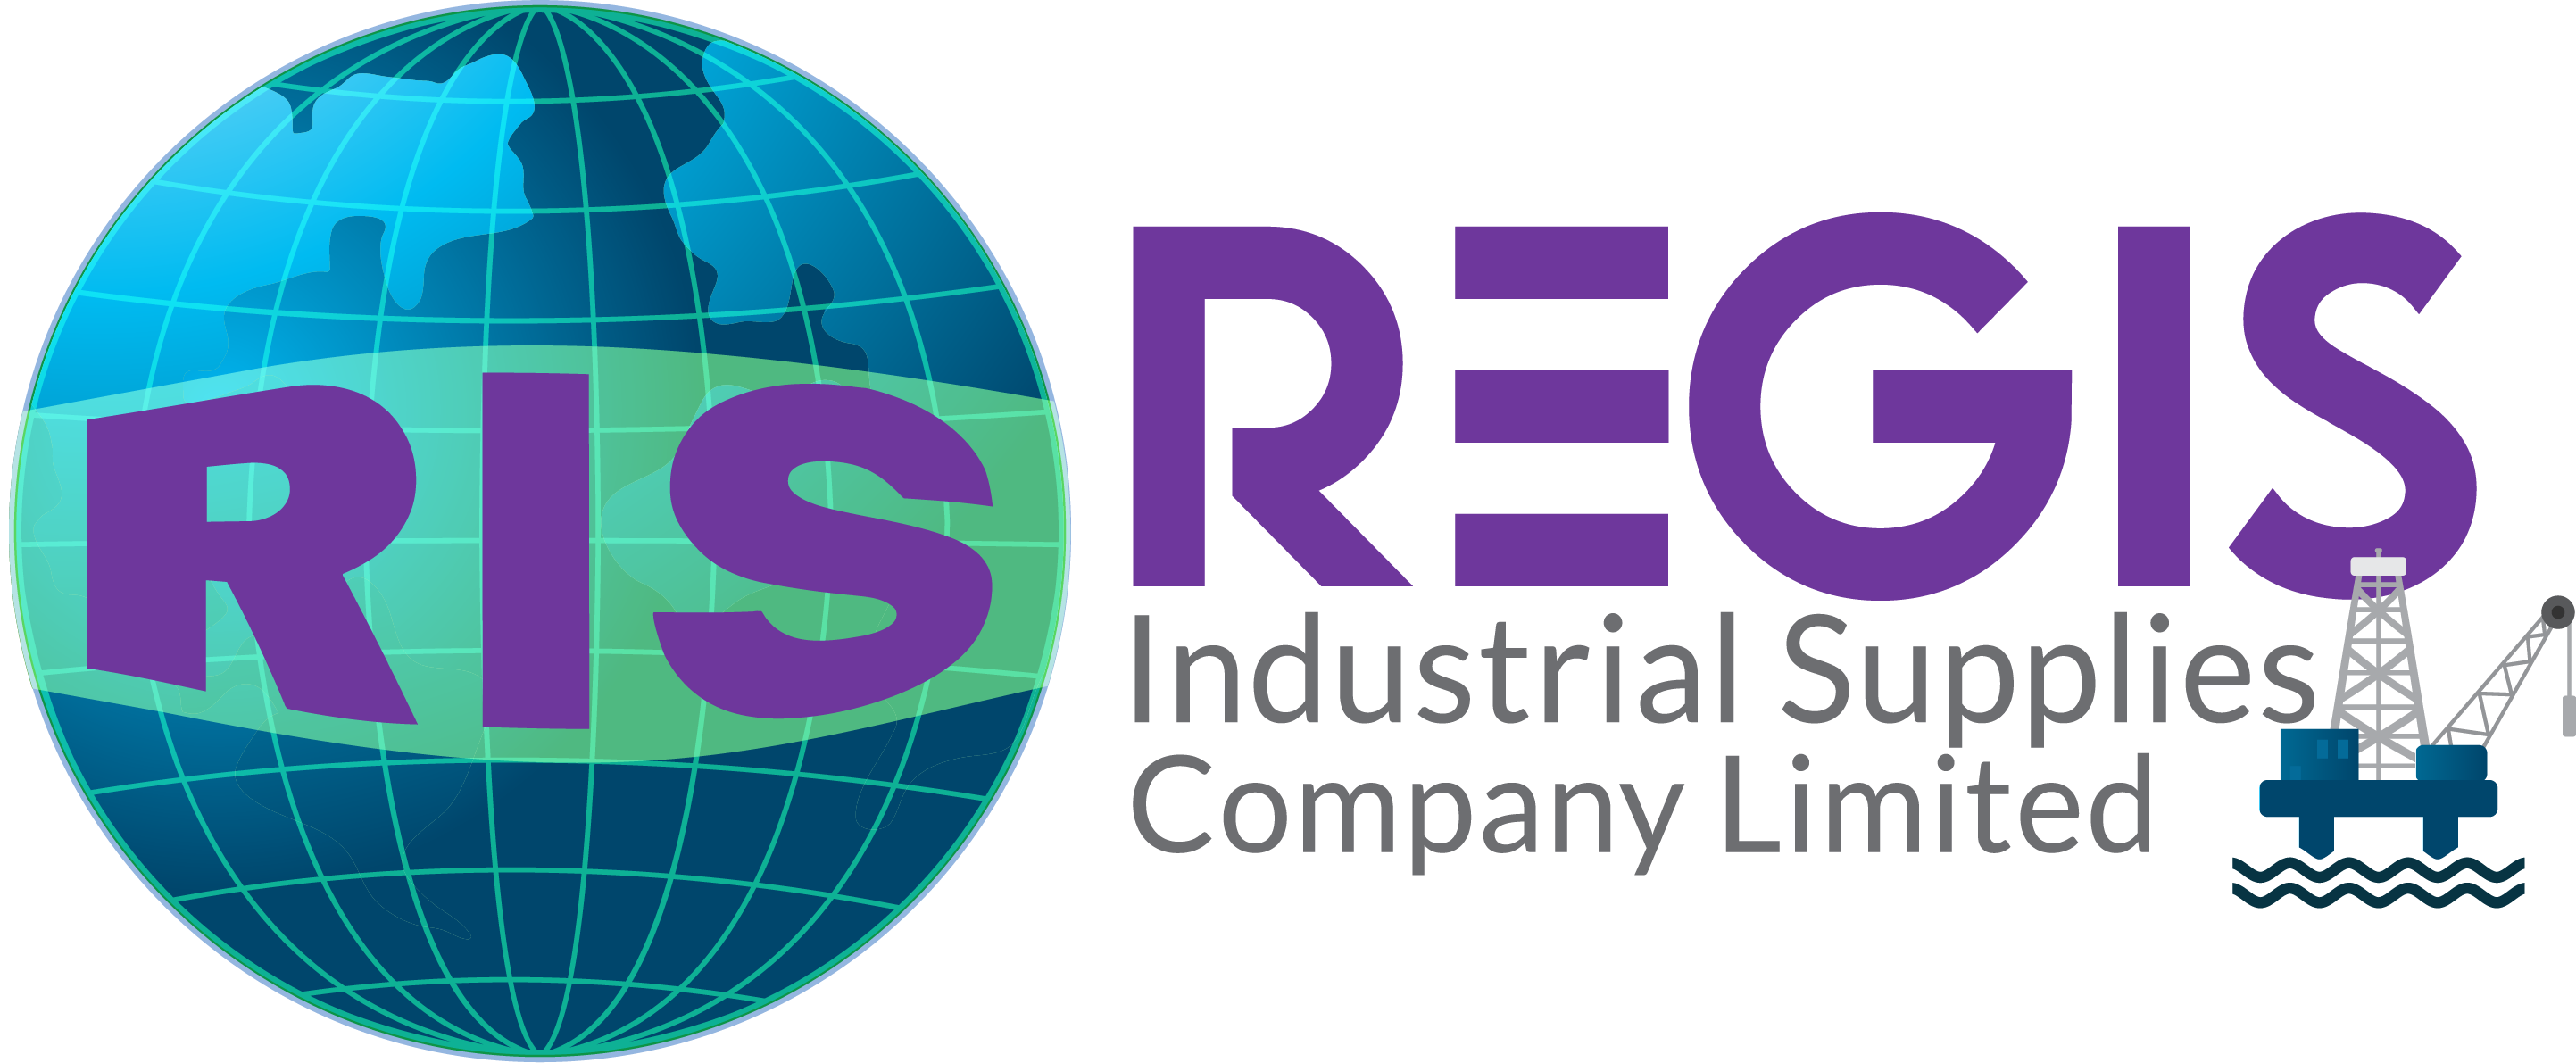 Regis Industrial Supplies Company Limited